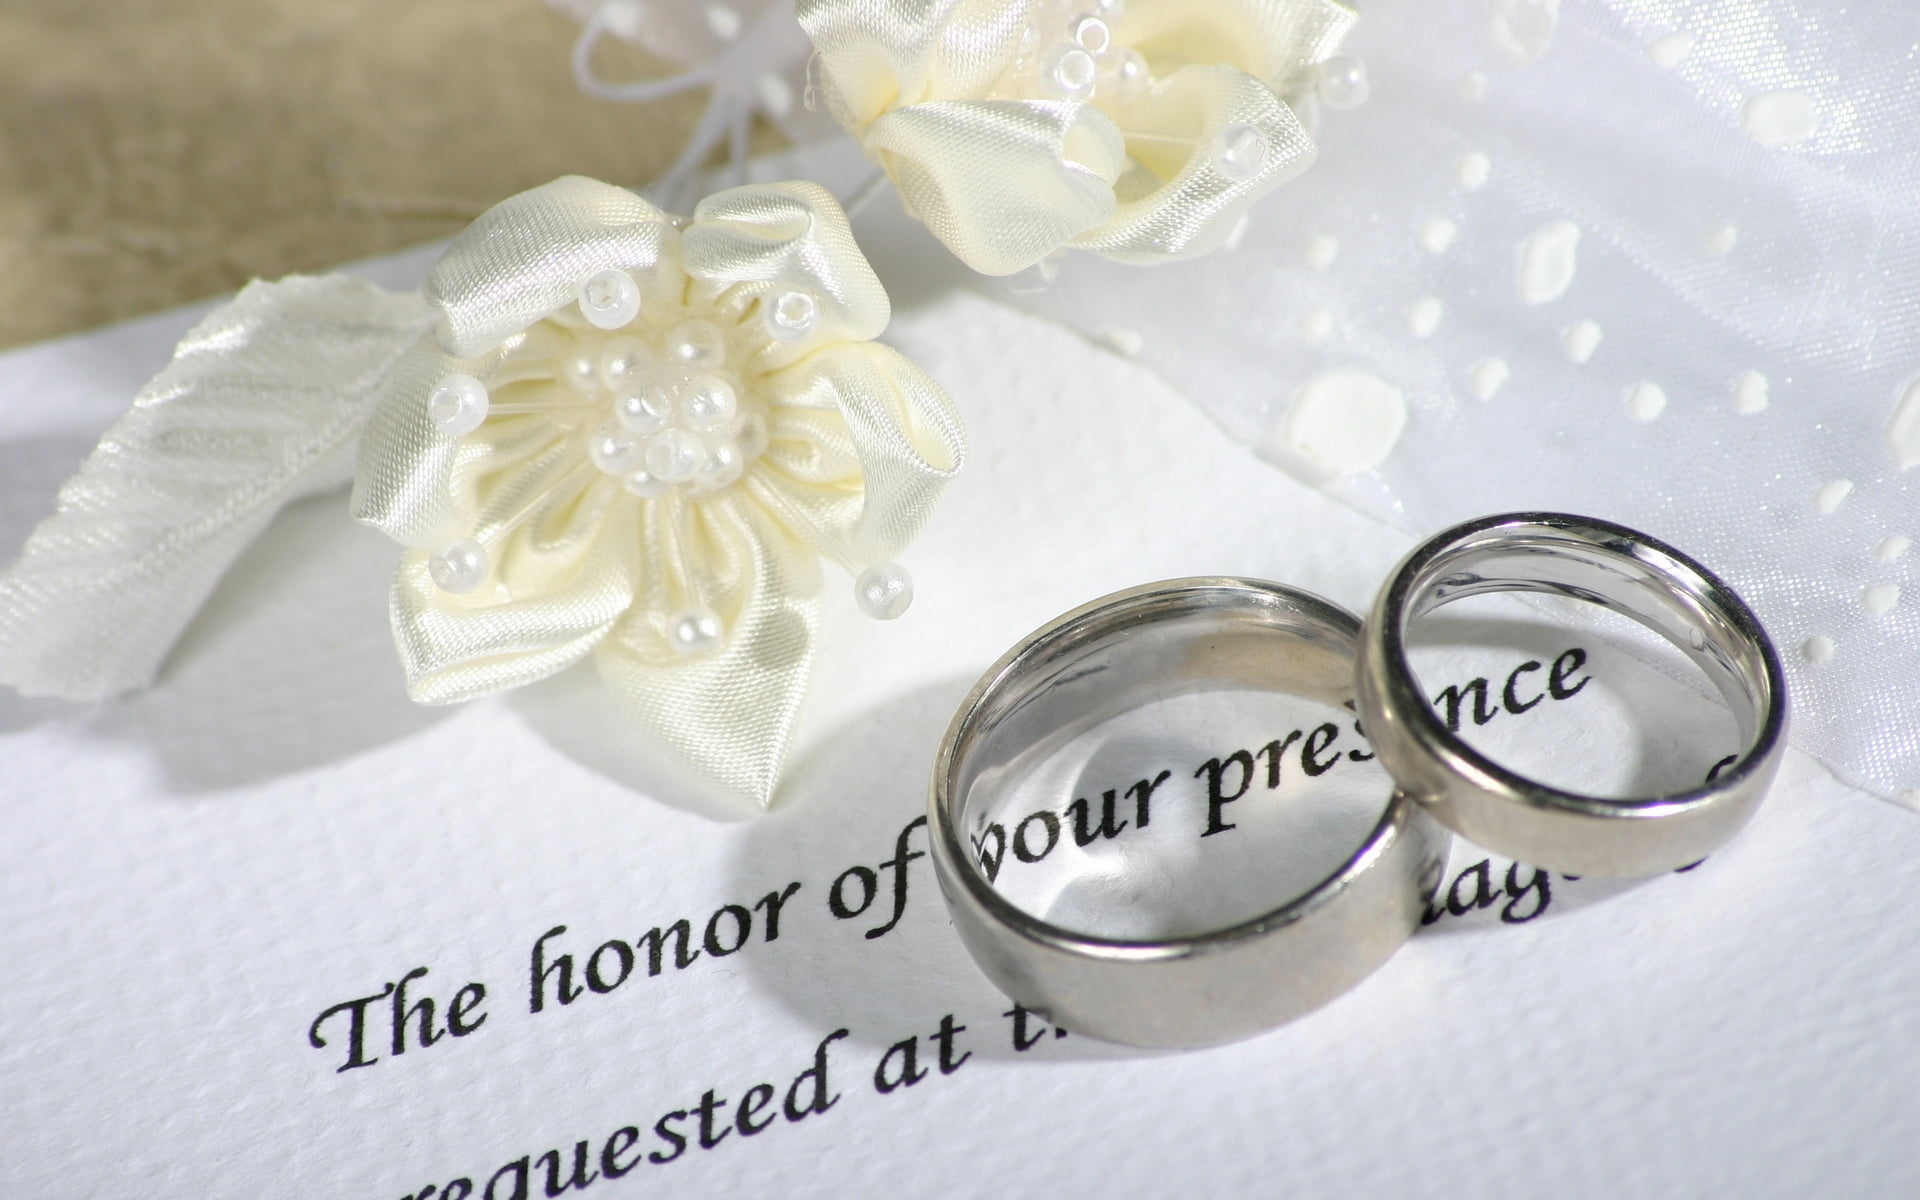 silver-colored couple ring, rings, wedding bands, invitation